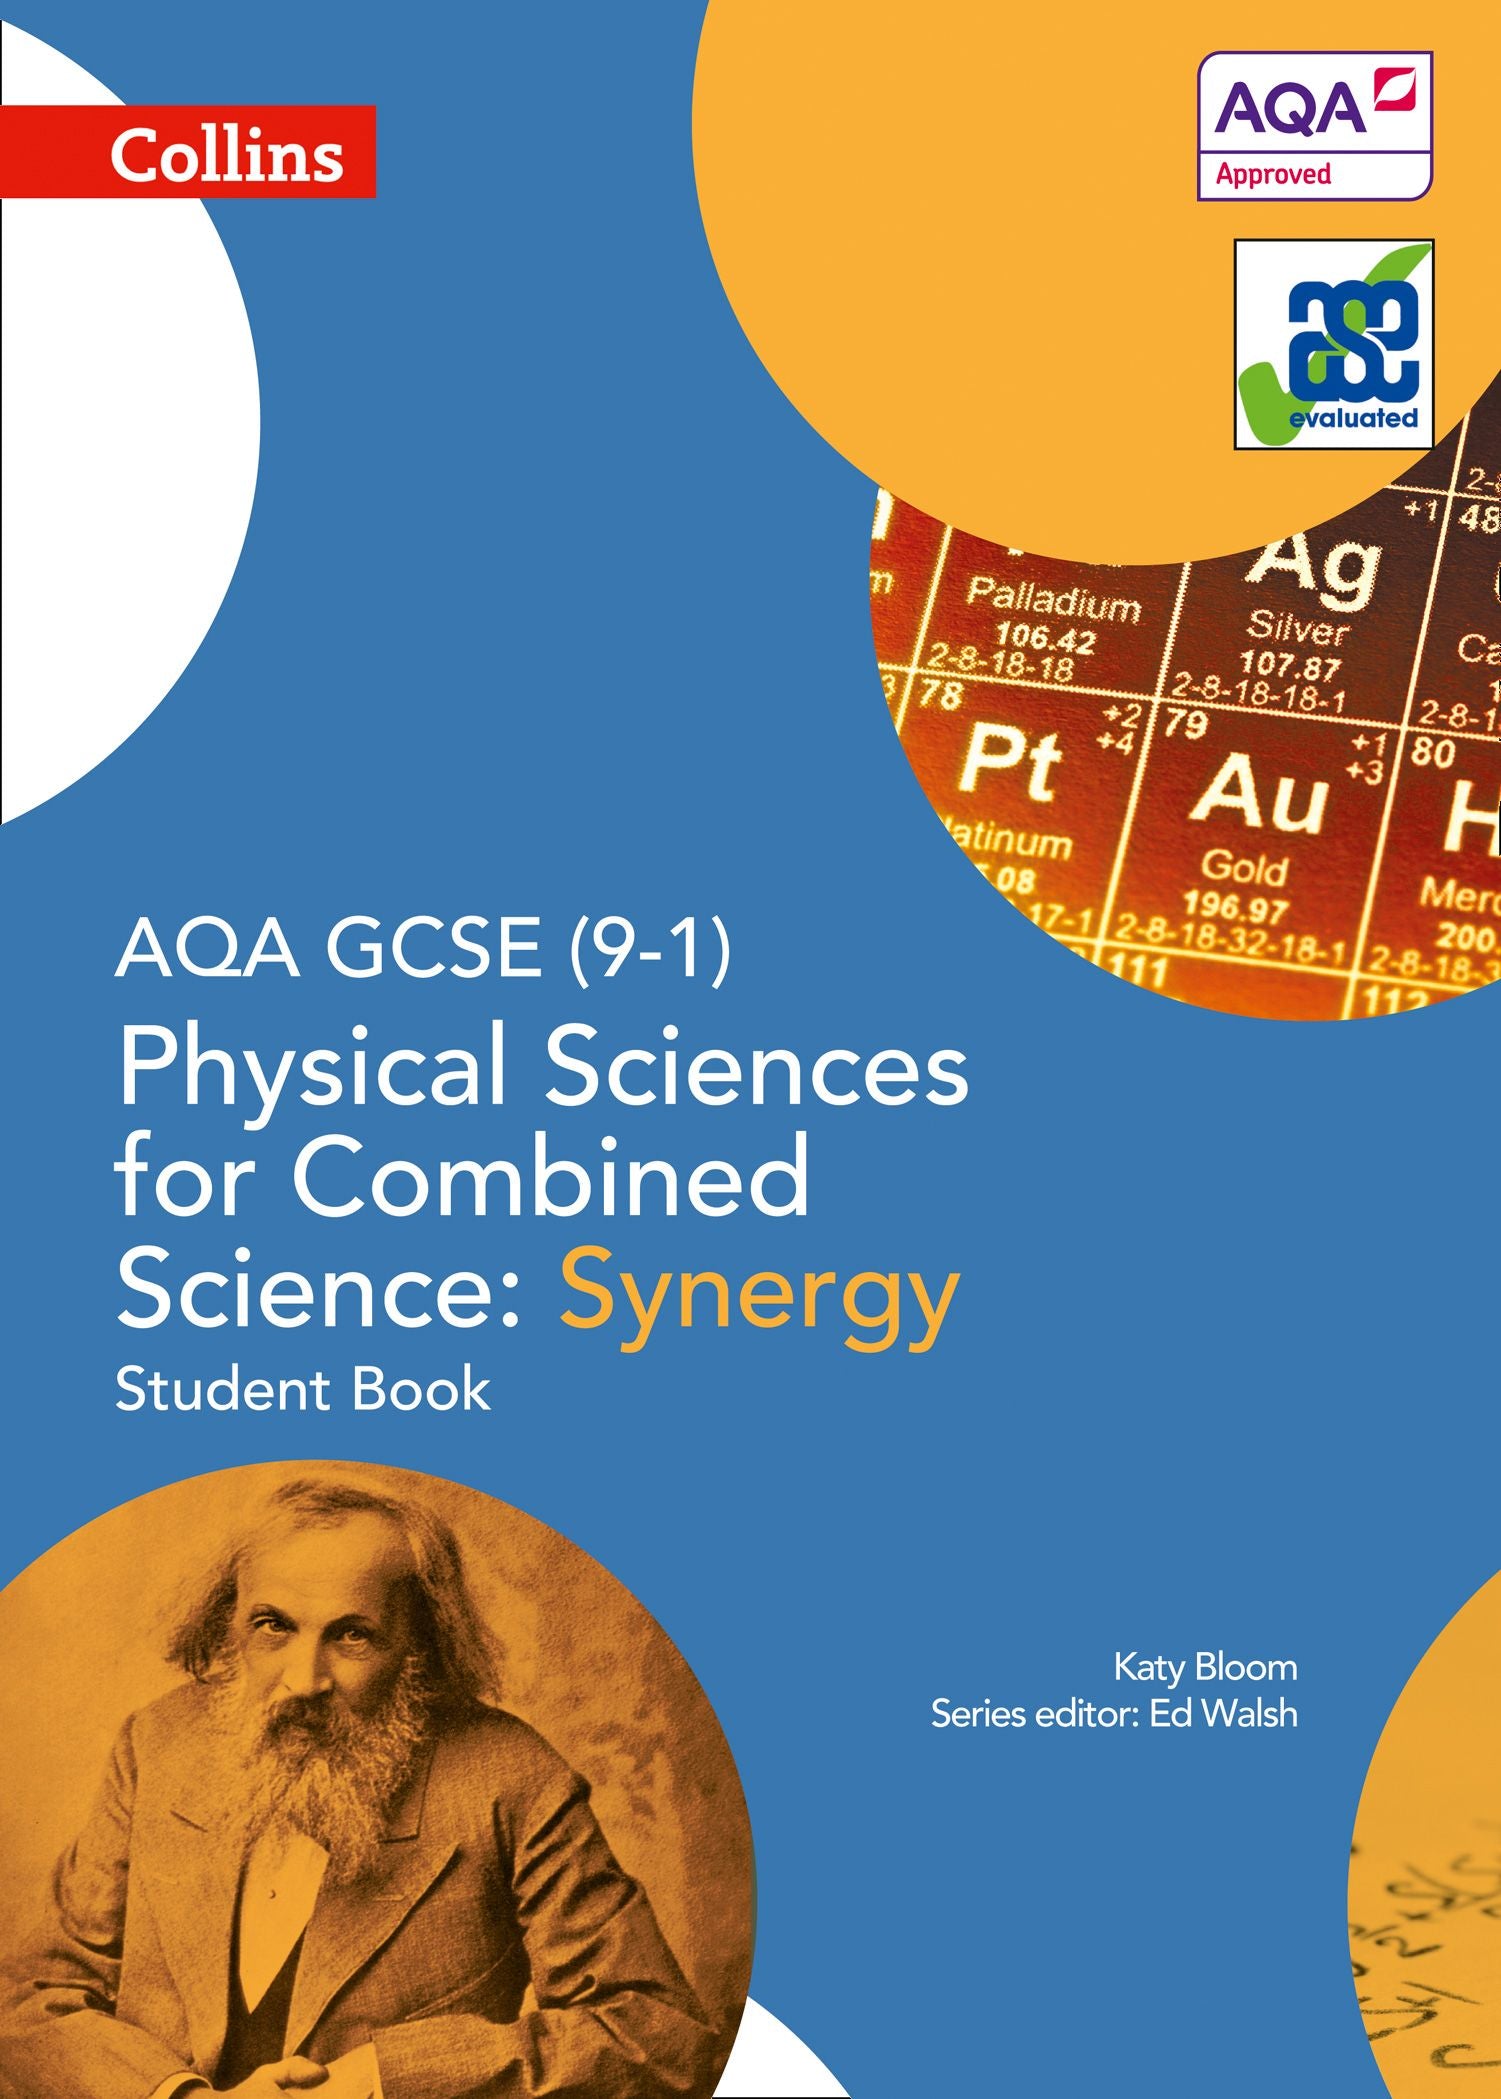 P5 G) Elasticity – AQA Combined Science Trilogy - Elevise